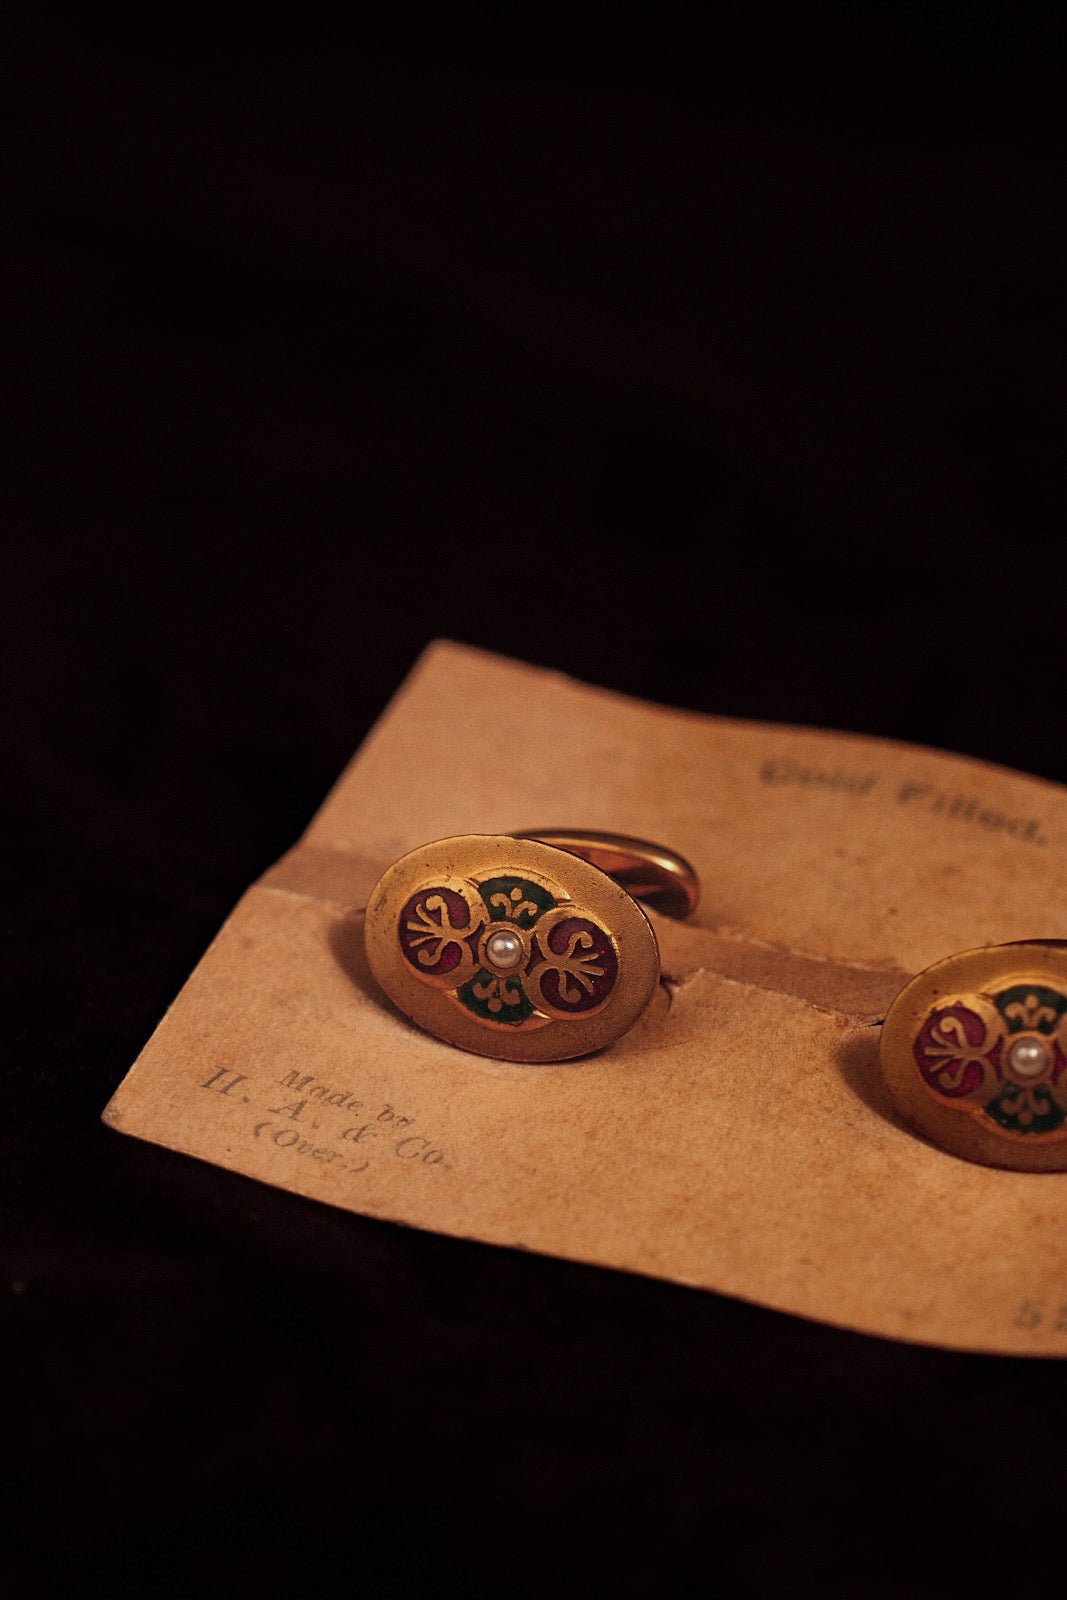 1920s Gold Filled Cufflinks With Painted Crest By H.A. & Co.